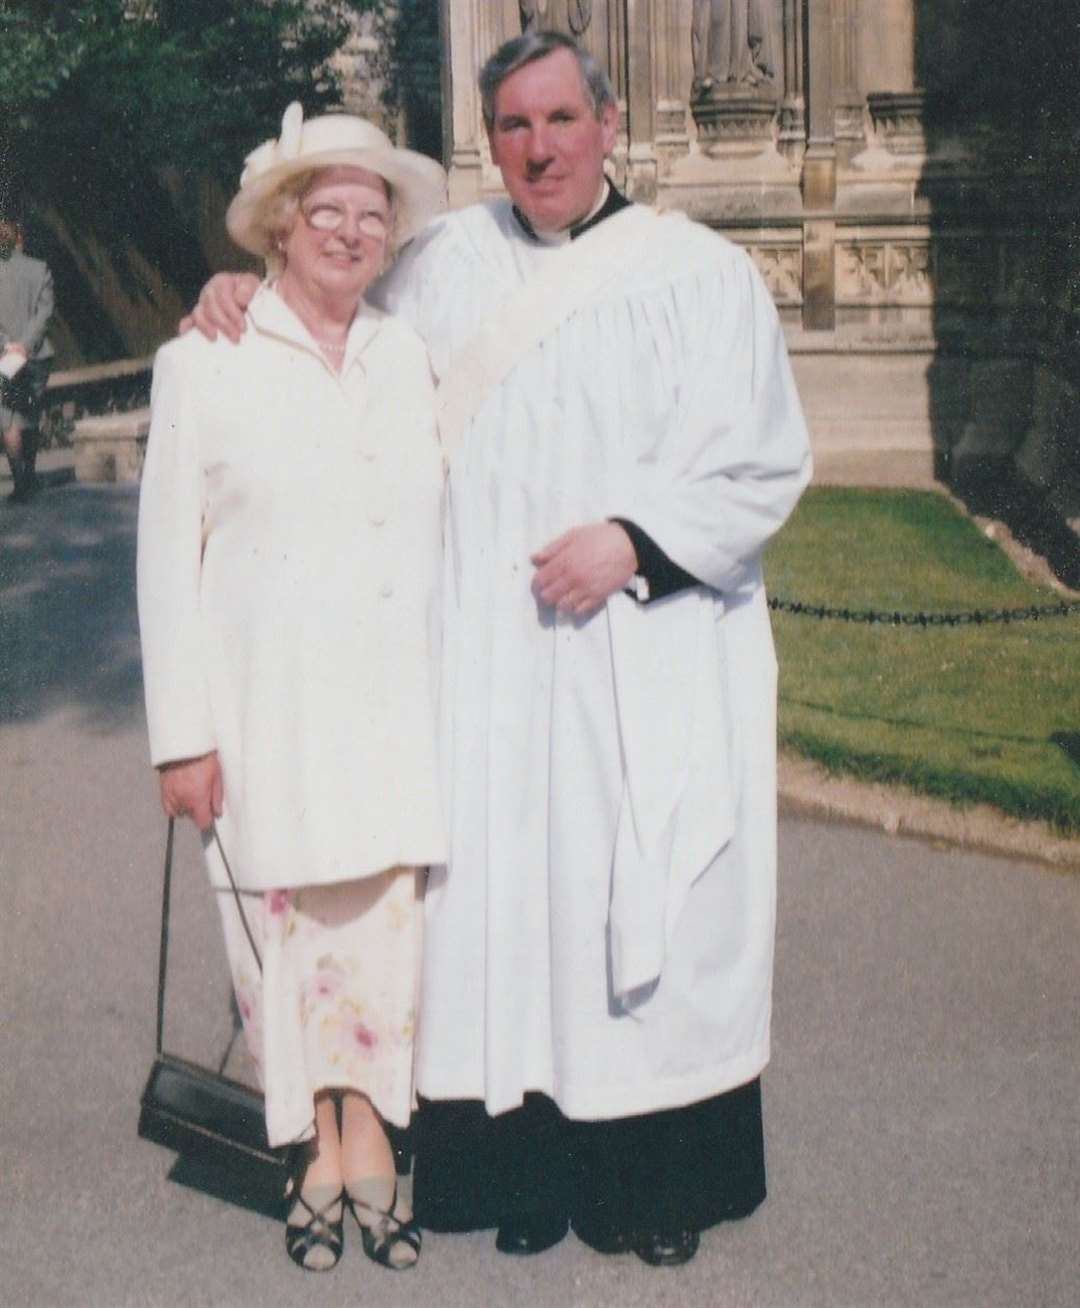 Iain Taylor with wife Doris at his ordination. Picture: Liz Sharp